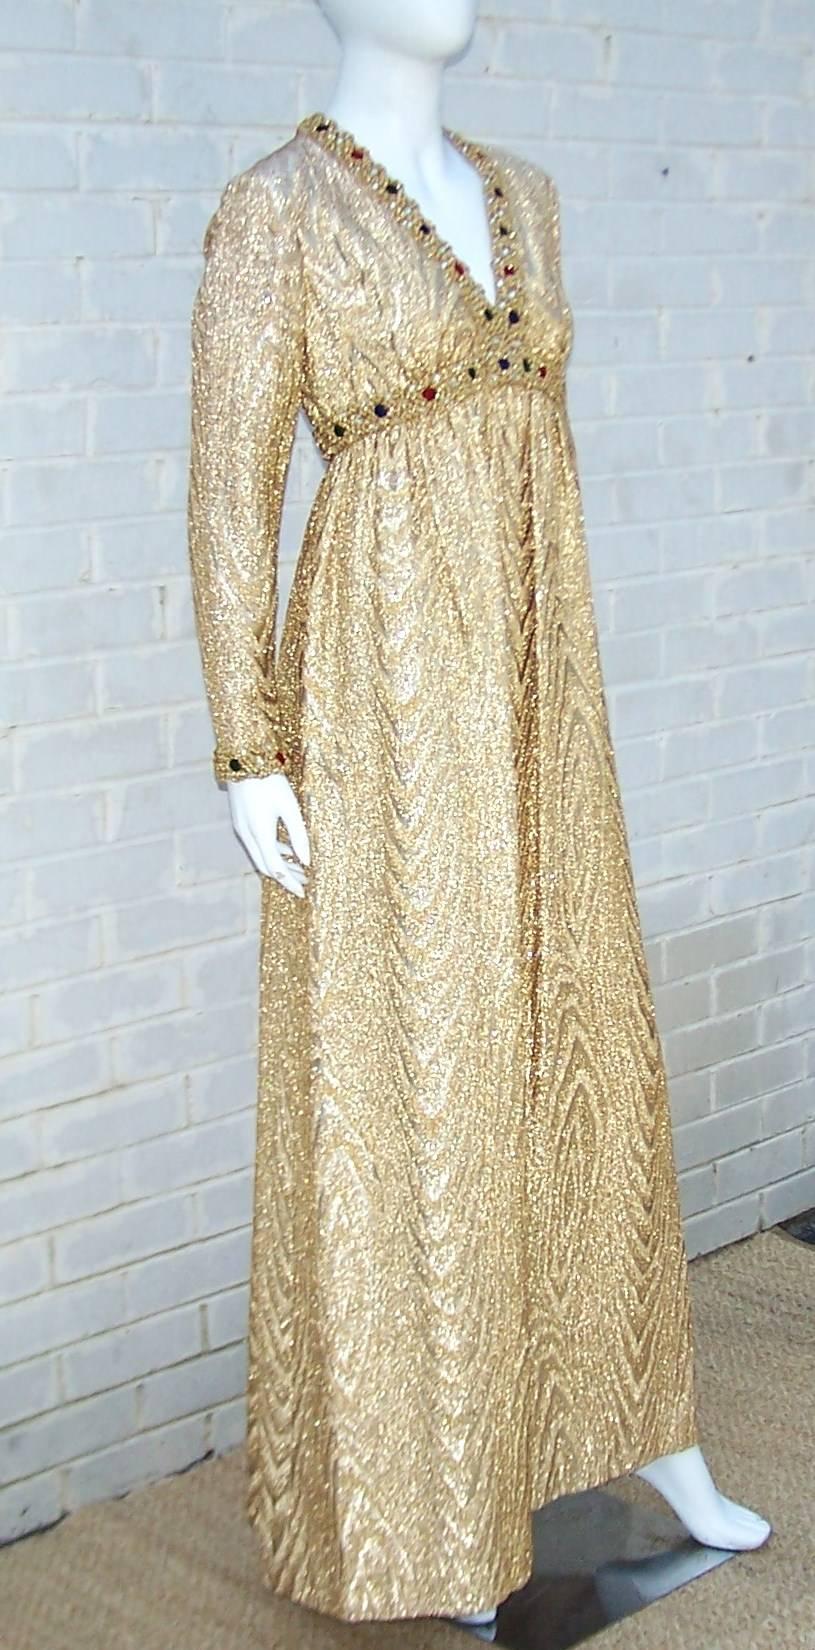 This Anne Fogarty empire maxi dress has the midas touch.  The heavy gold lame fabric has a moire design with textural gold braided trim on the empire waist bodice and cuffs.  The trim is embellished with colorful velvet poms and faceted rhinestones.